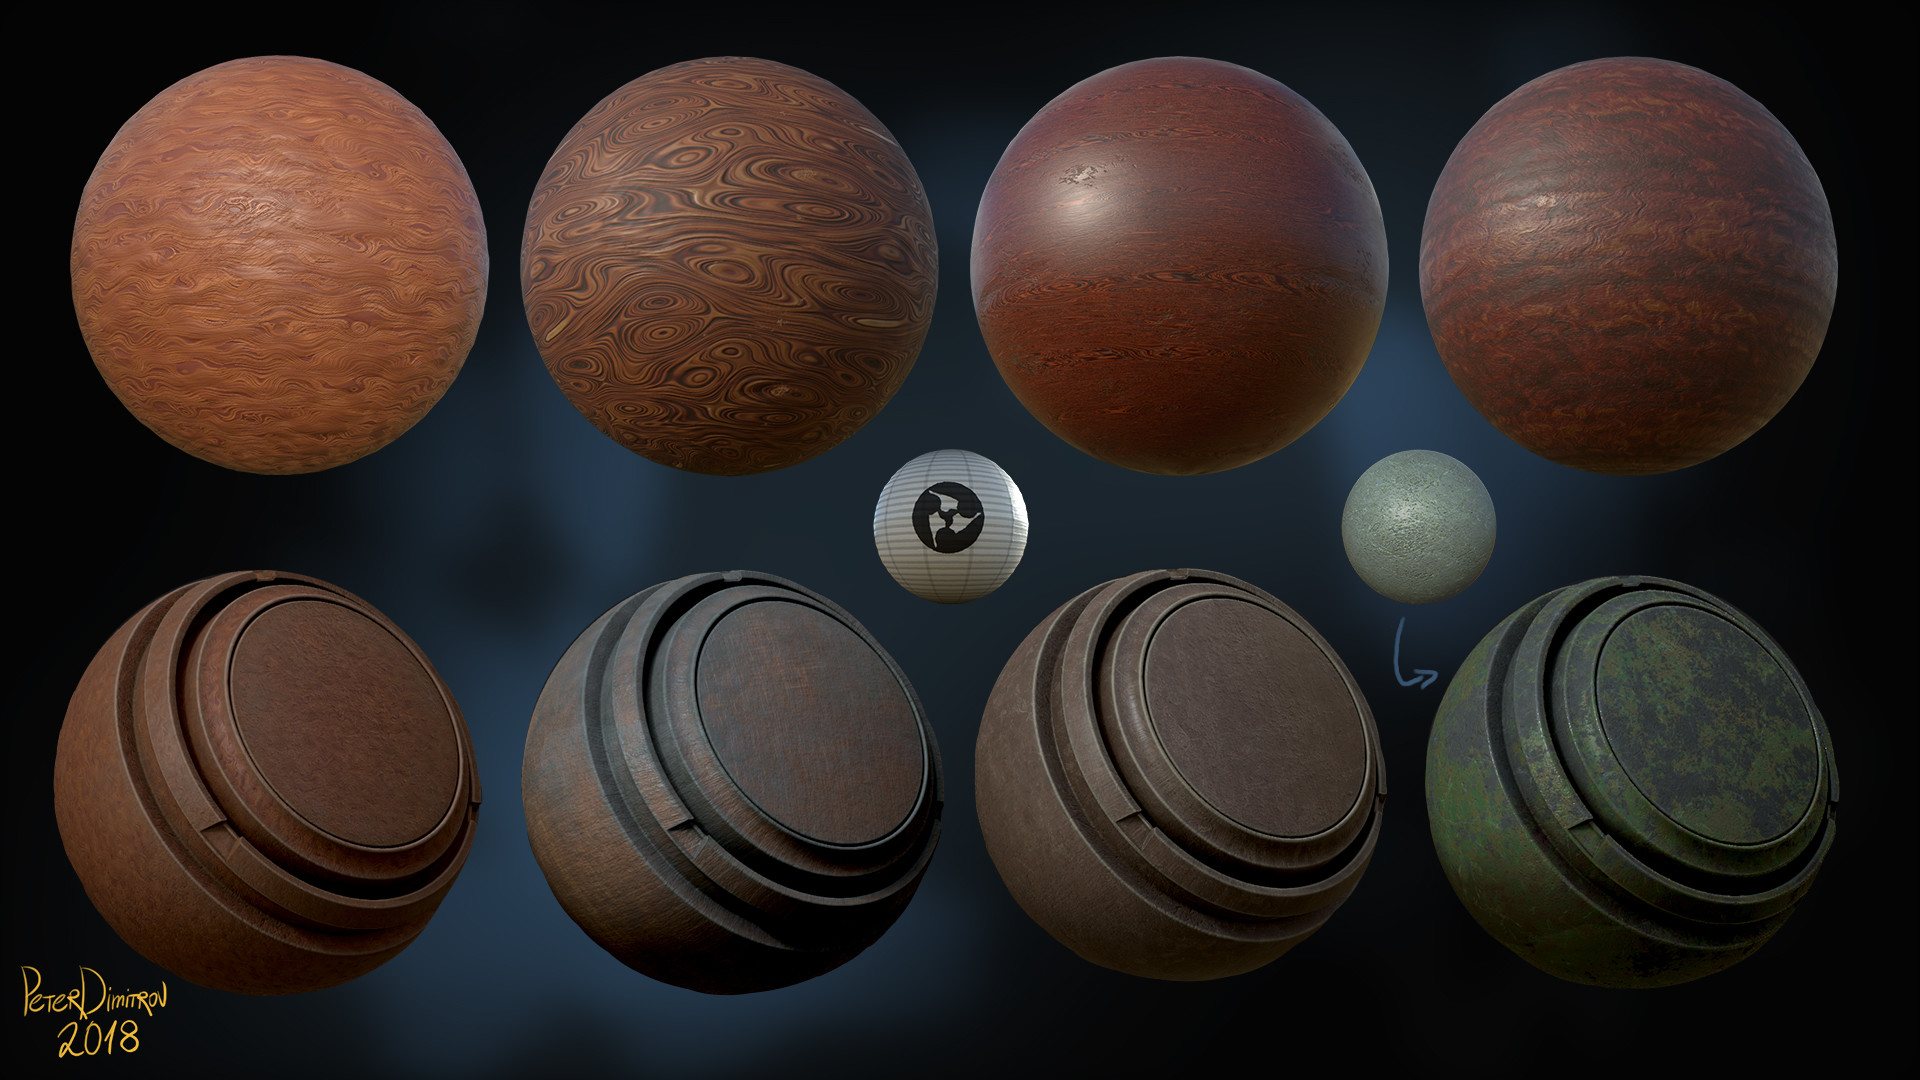 Material callout sheet two. Shows another 8 UV spheres. Between them are 2 tiny ones. In order of appearance: wood warm and light, wood darker, wood mahogany, wood mahogany intricate. The next 4 uv spheres are of “Smart Materials” set up in Substance Painter using the above previous 4. Those are wood and mossy stone surfaces. Between all spheres are the final 2 tiny ones that show paper lantern texture and base stone texture.